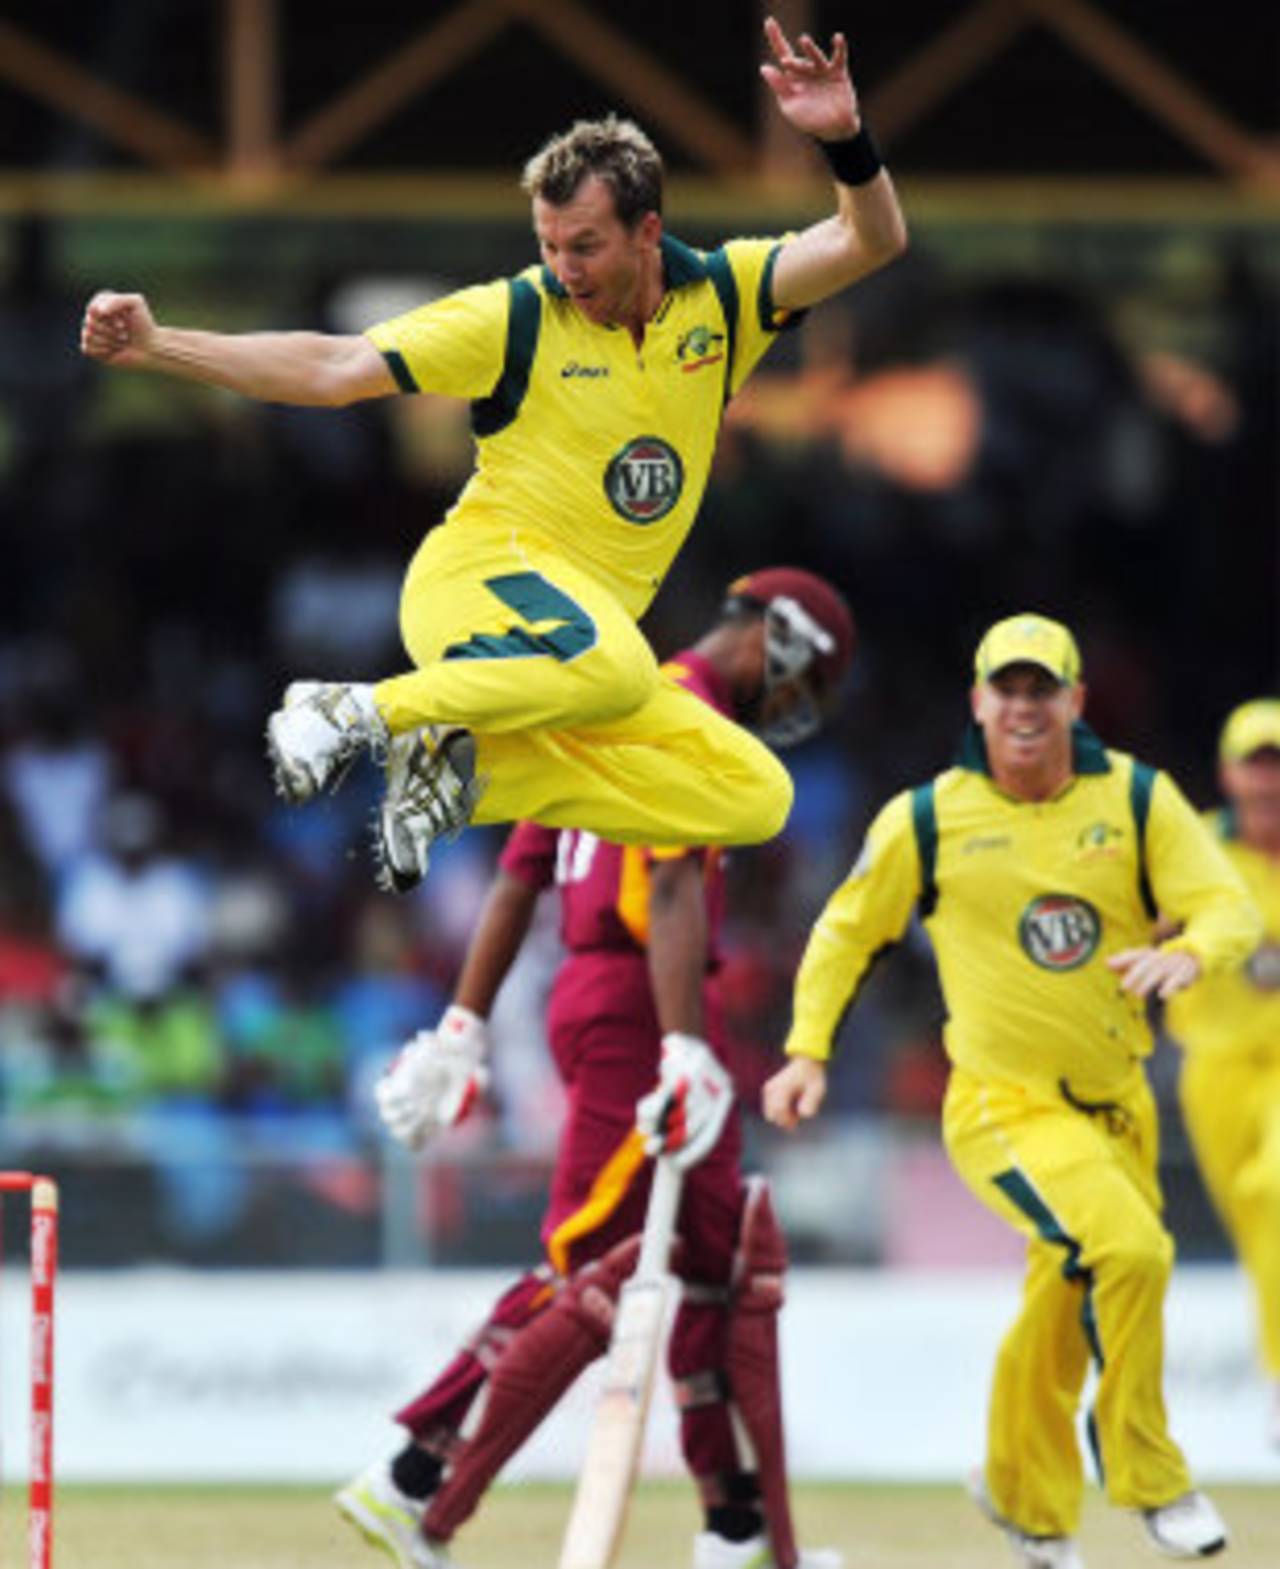 Brett Lee clicks his heels after taking a wicket with the first ball of the innings, West Indies v Australia, 2nd ODI, St Vincent, March 18, 2012